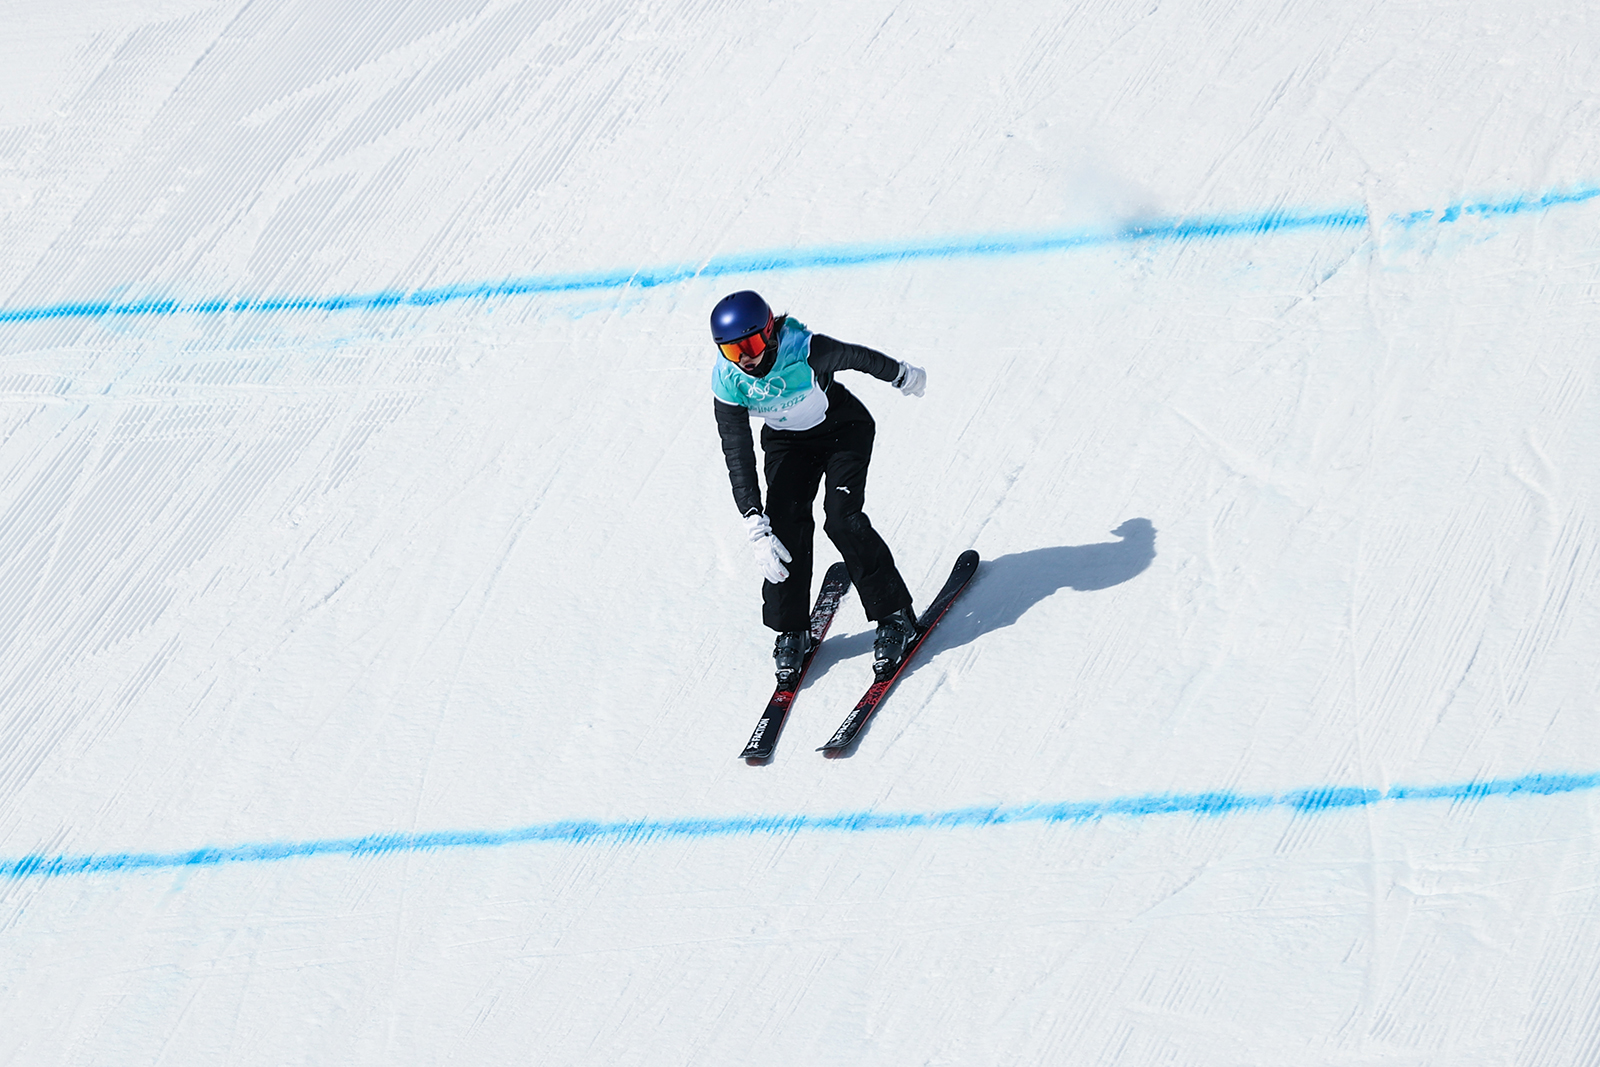 Eileen Gu of Team China competes during the women's freestyle skiing freeski big air qualification on Monday.